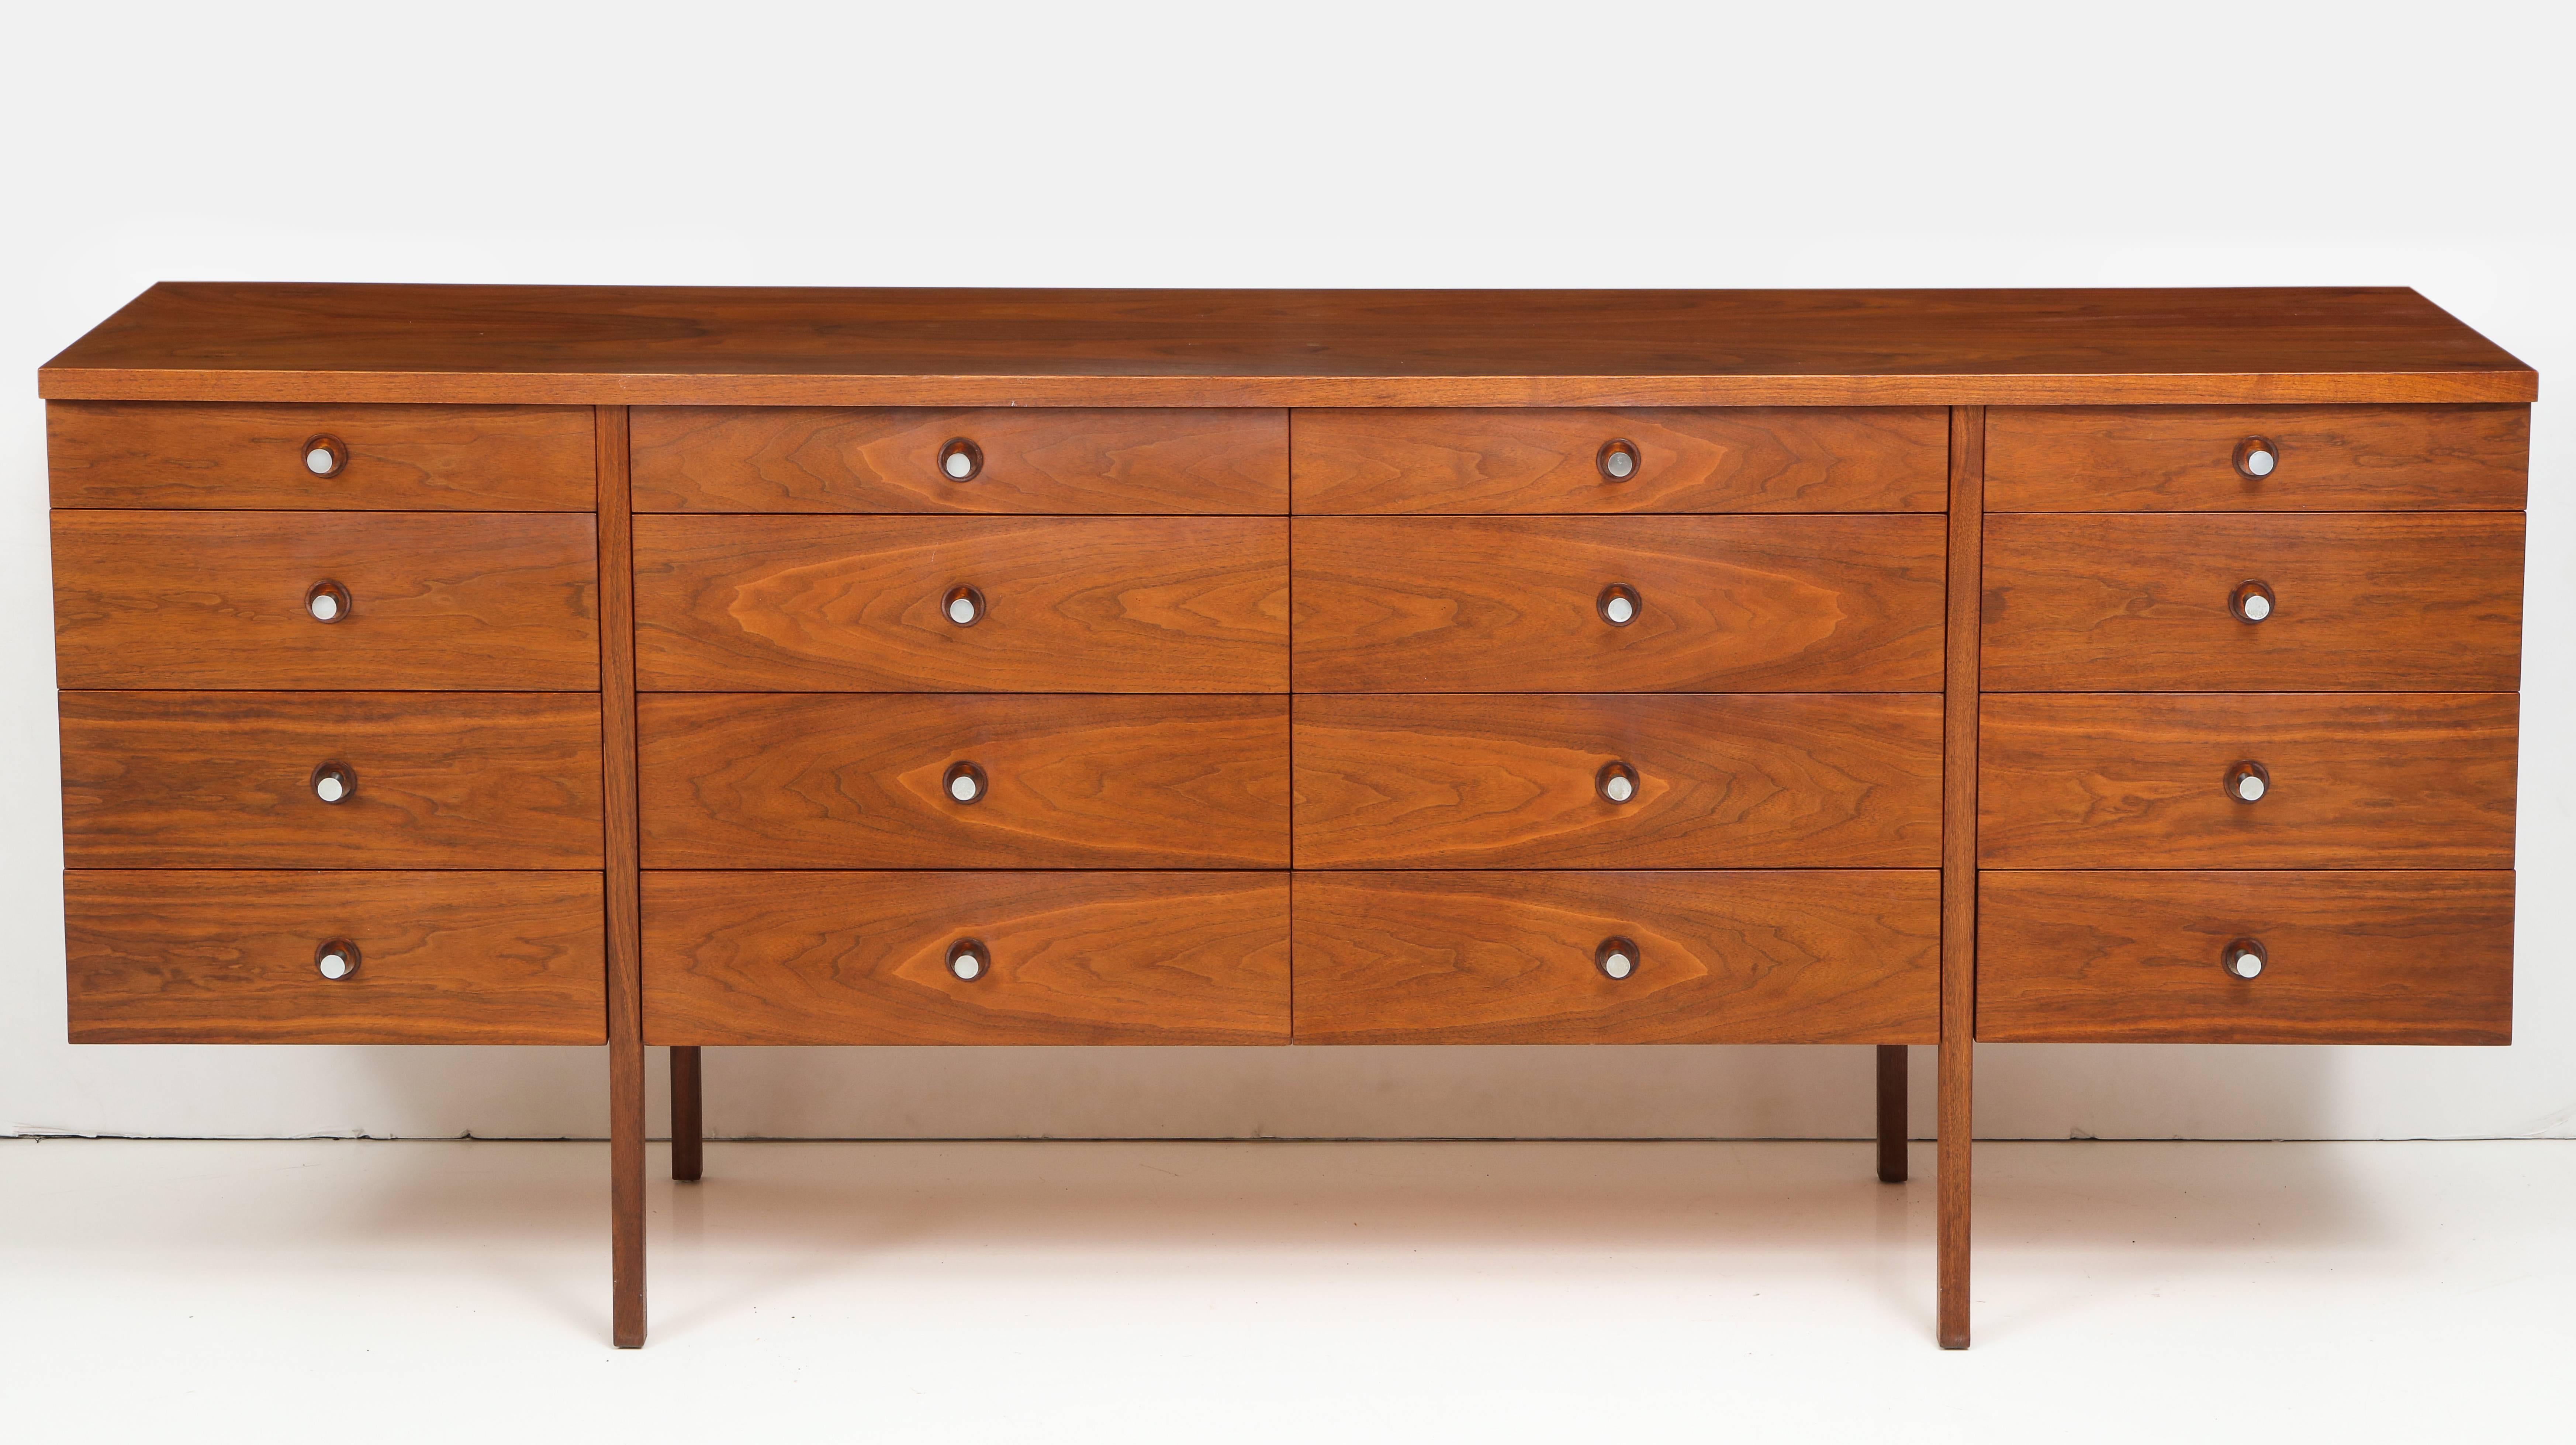 Elegant in its simplicity and unusually useful in its form. This chest of drawers could function in number situations where storage is needed.